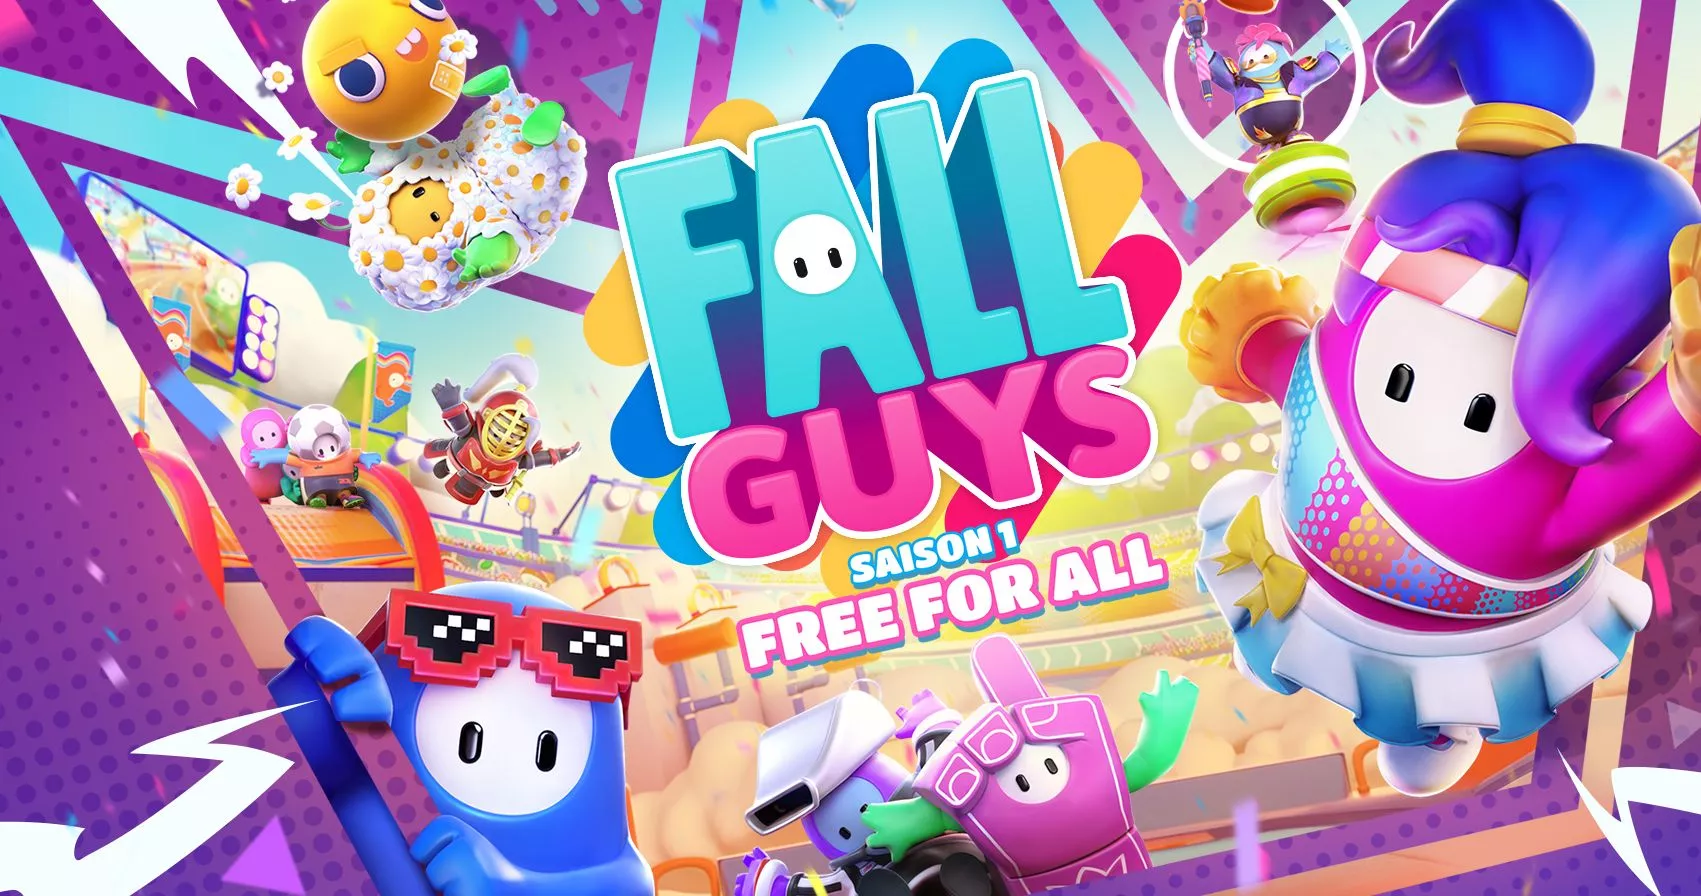 Fall Guys: Free for All - 20 Millionen Spieler seit Free to Play Umstellung Heropic